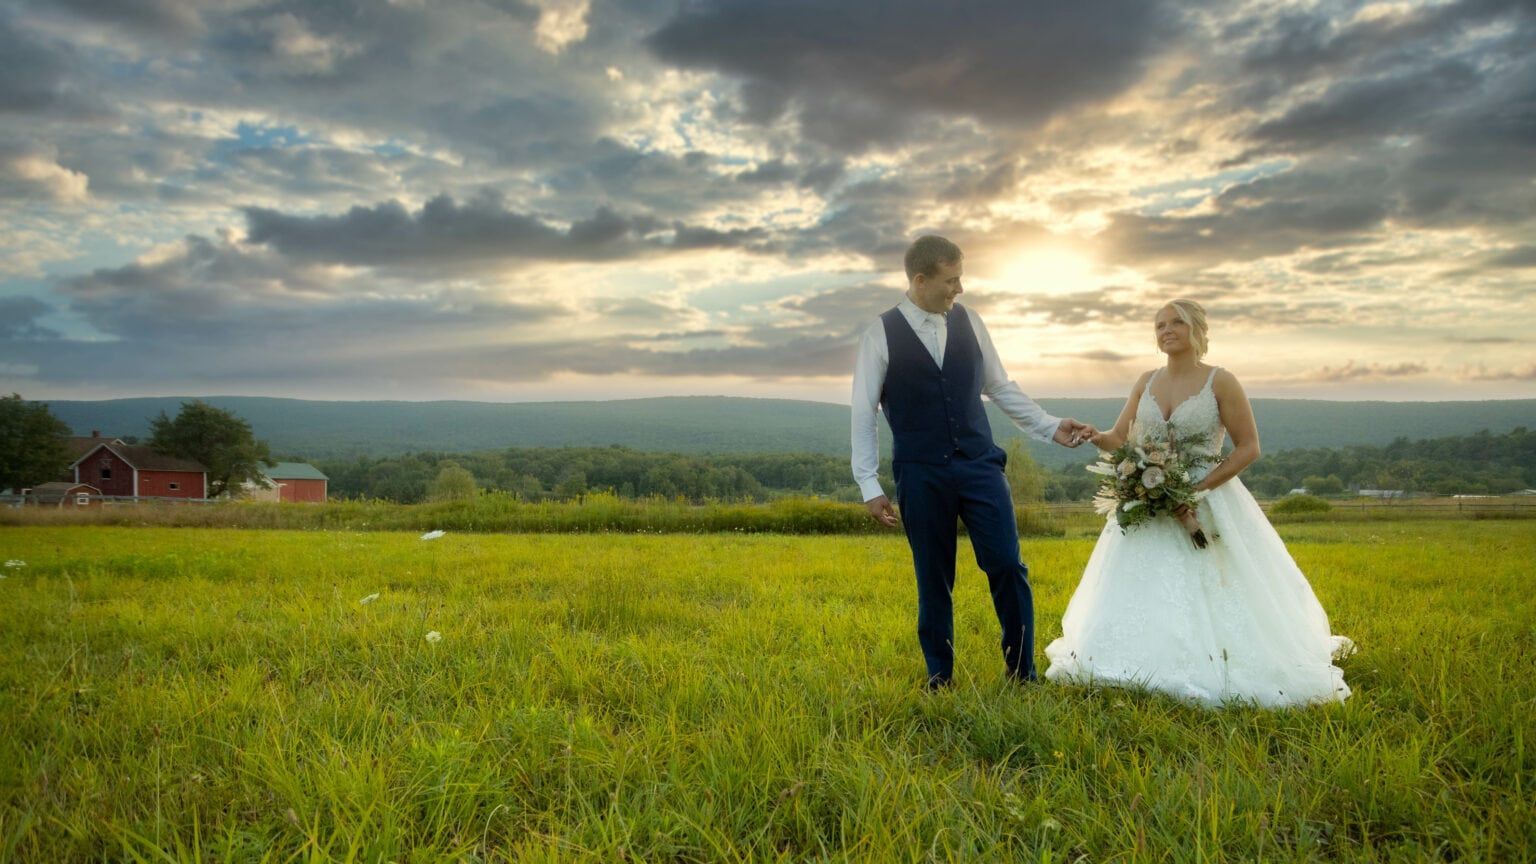 A bride and groom are standing in a grassy field holding hands.